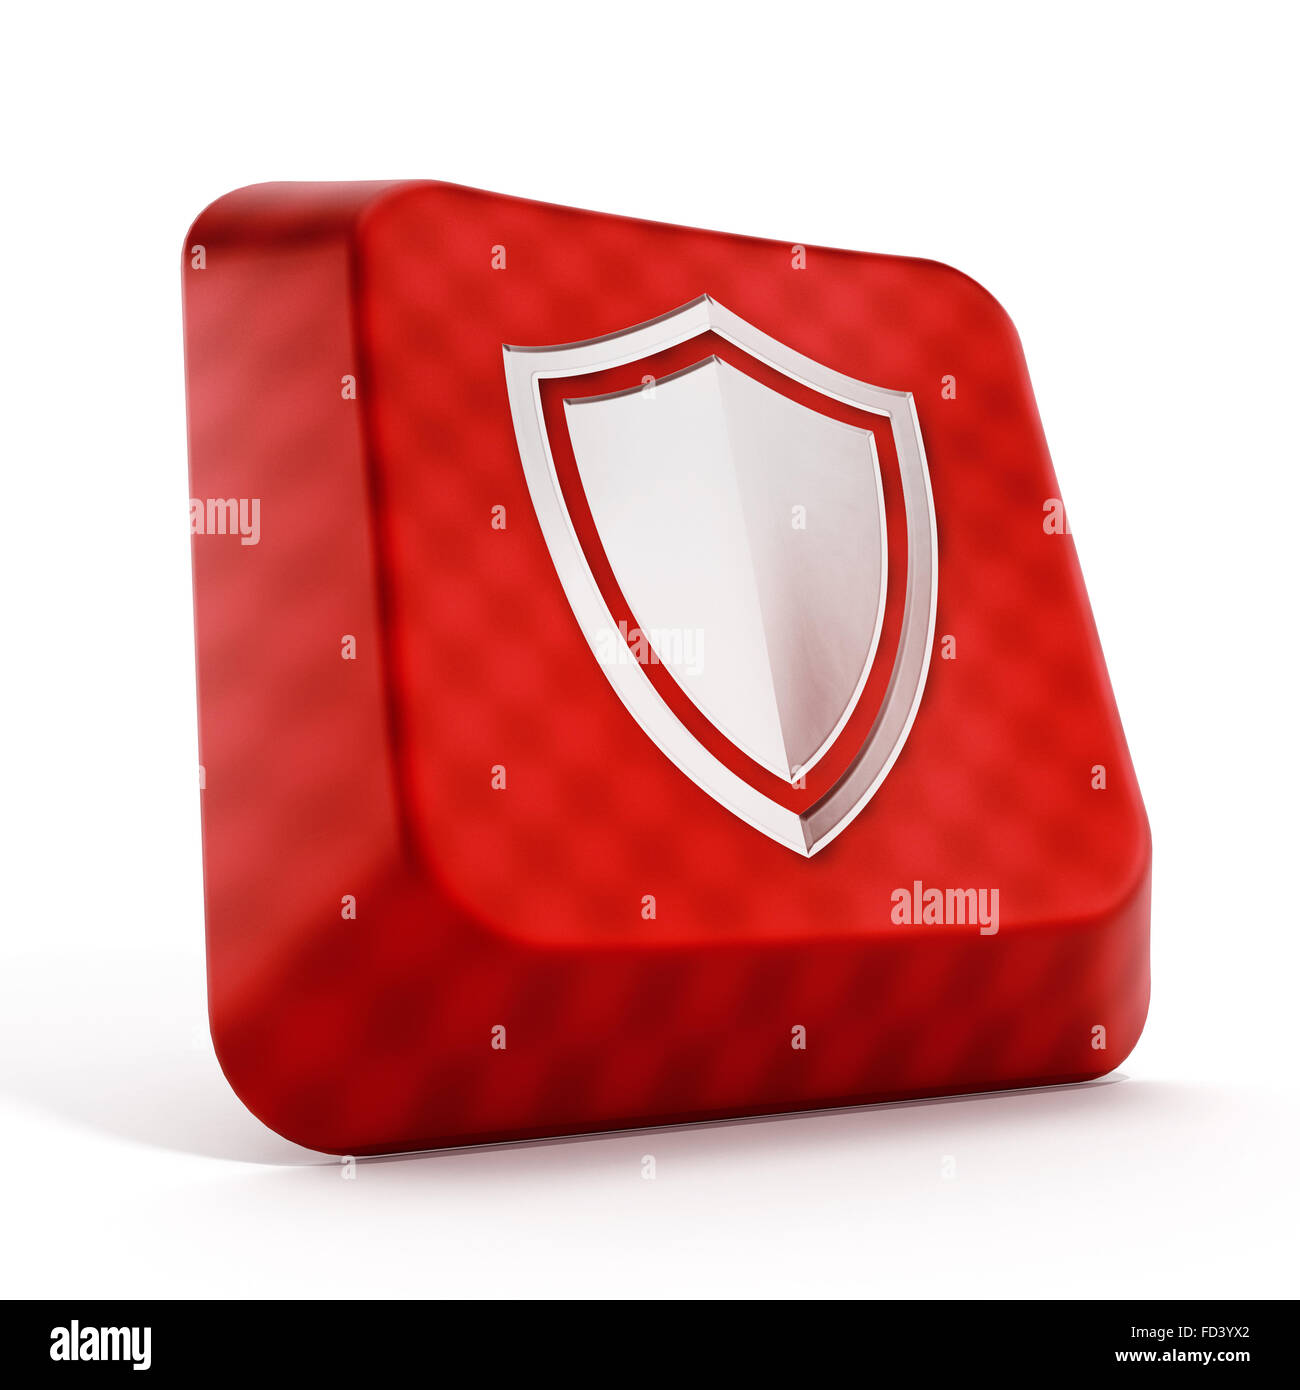 Shield icon on red computer key isolated on white background Stock Photo